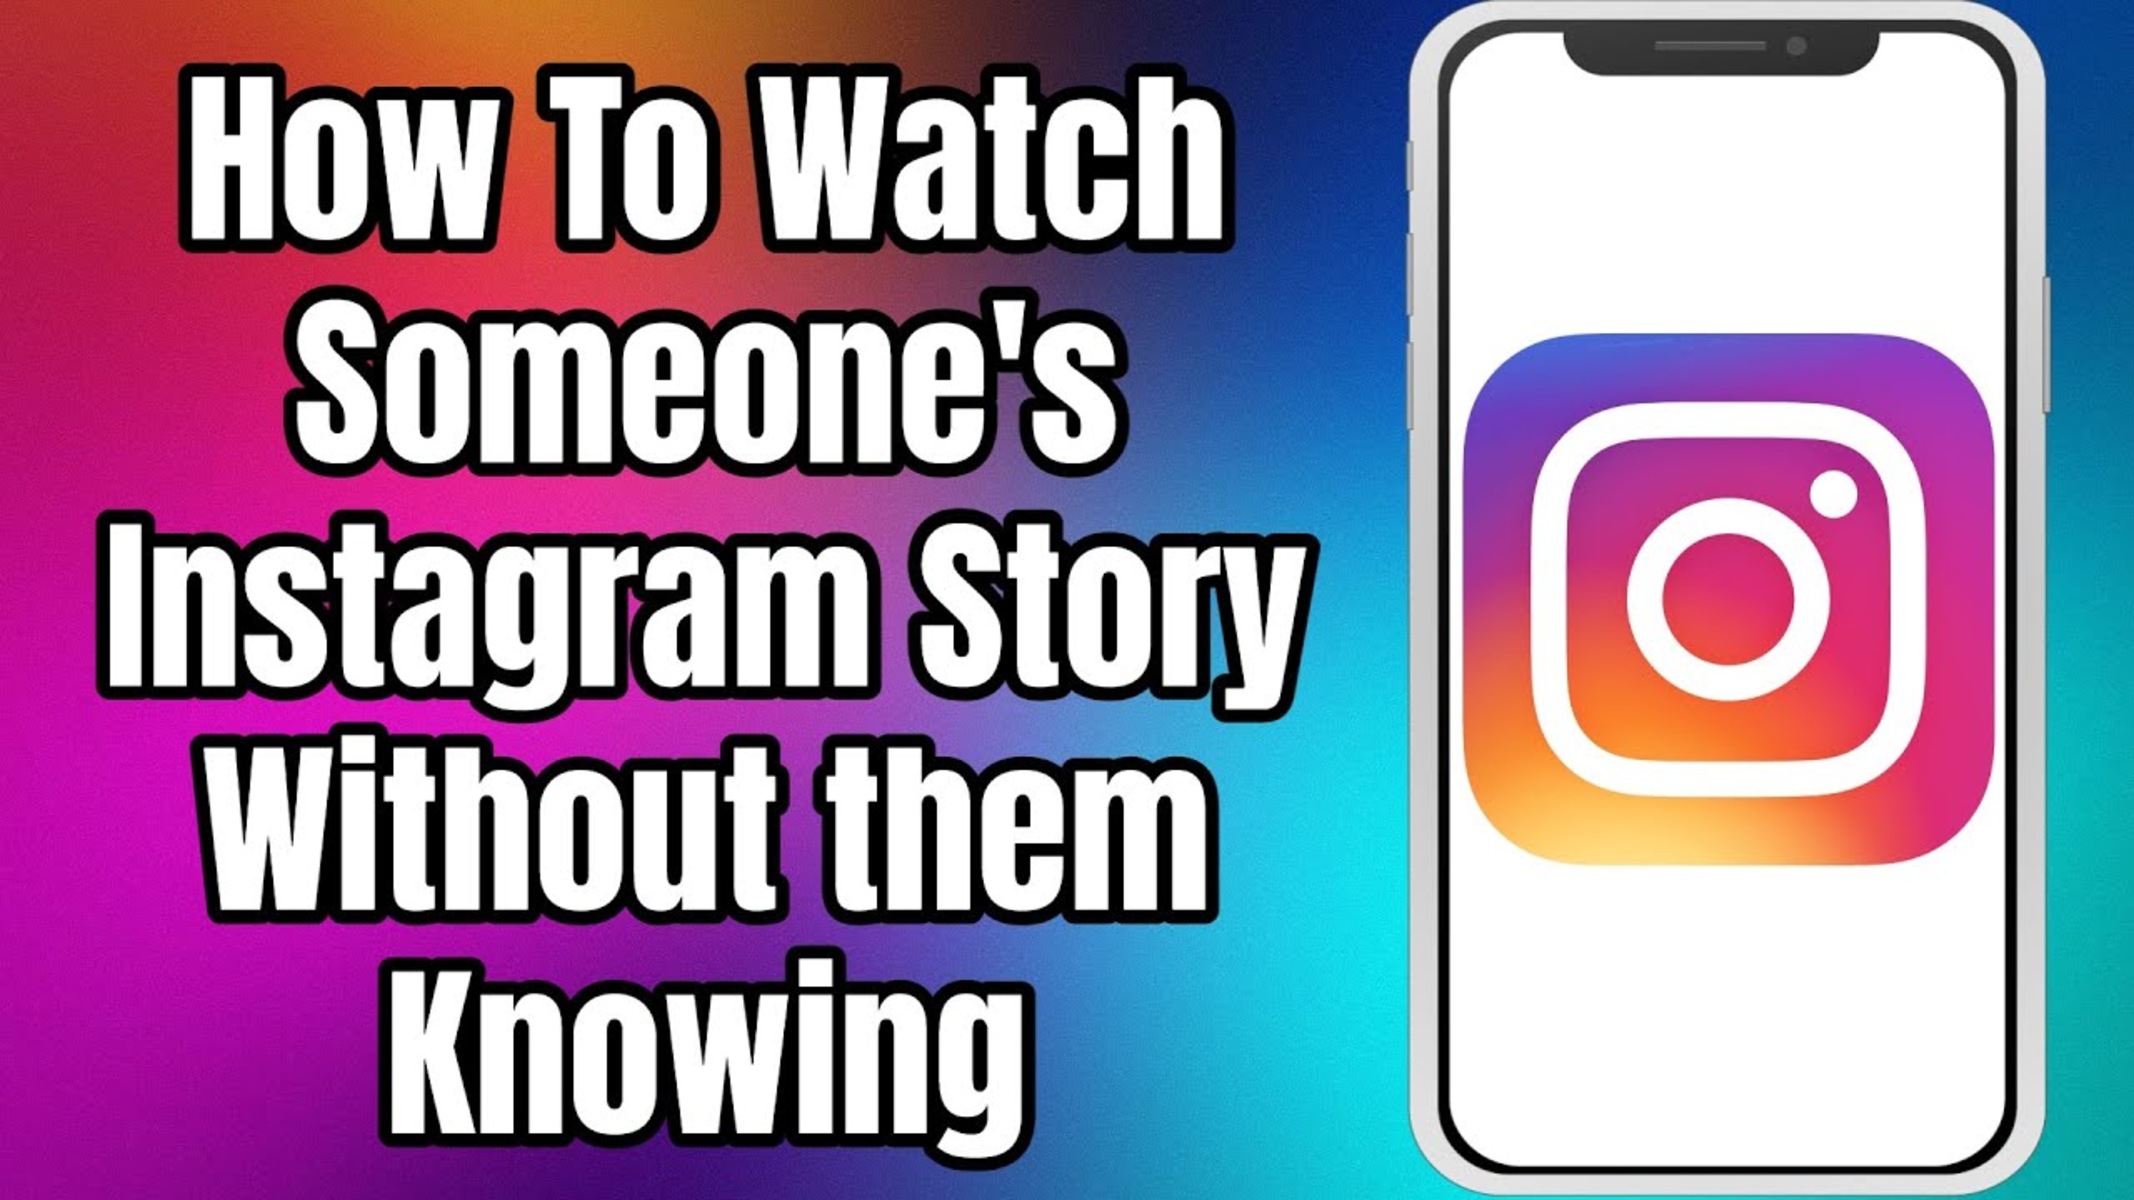 how-to-watch-someones-instagram-story-without-them-knowing